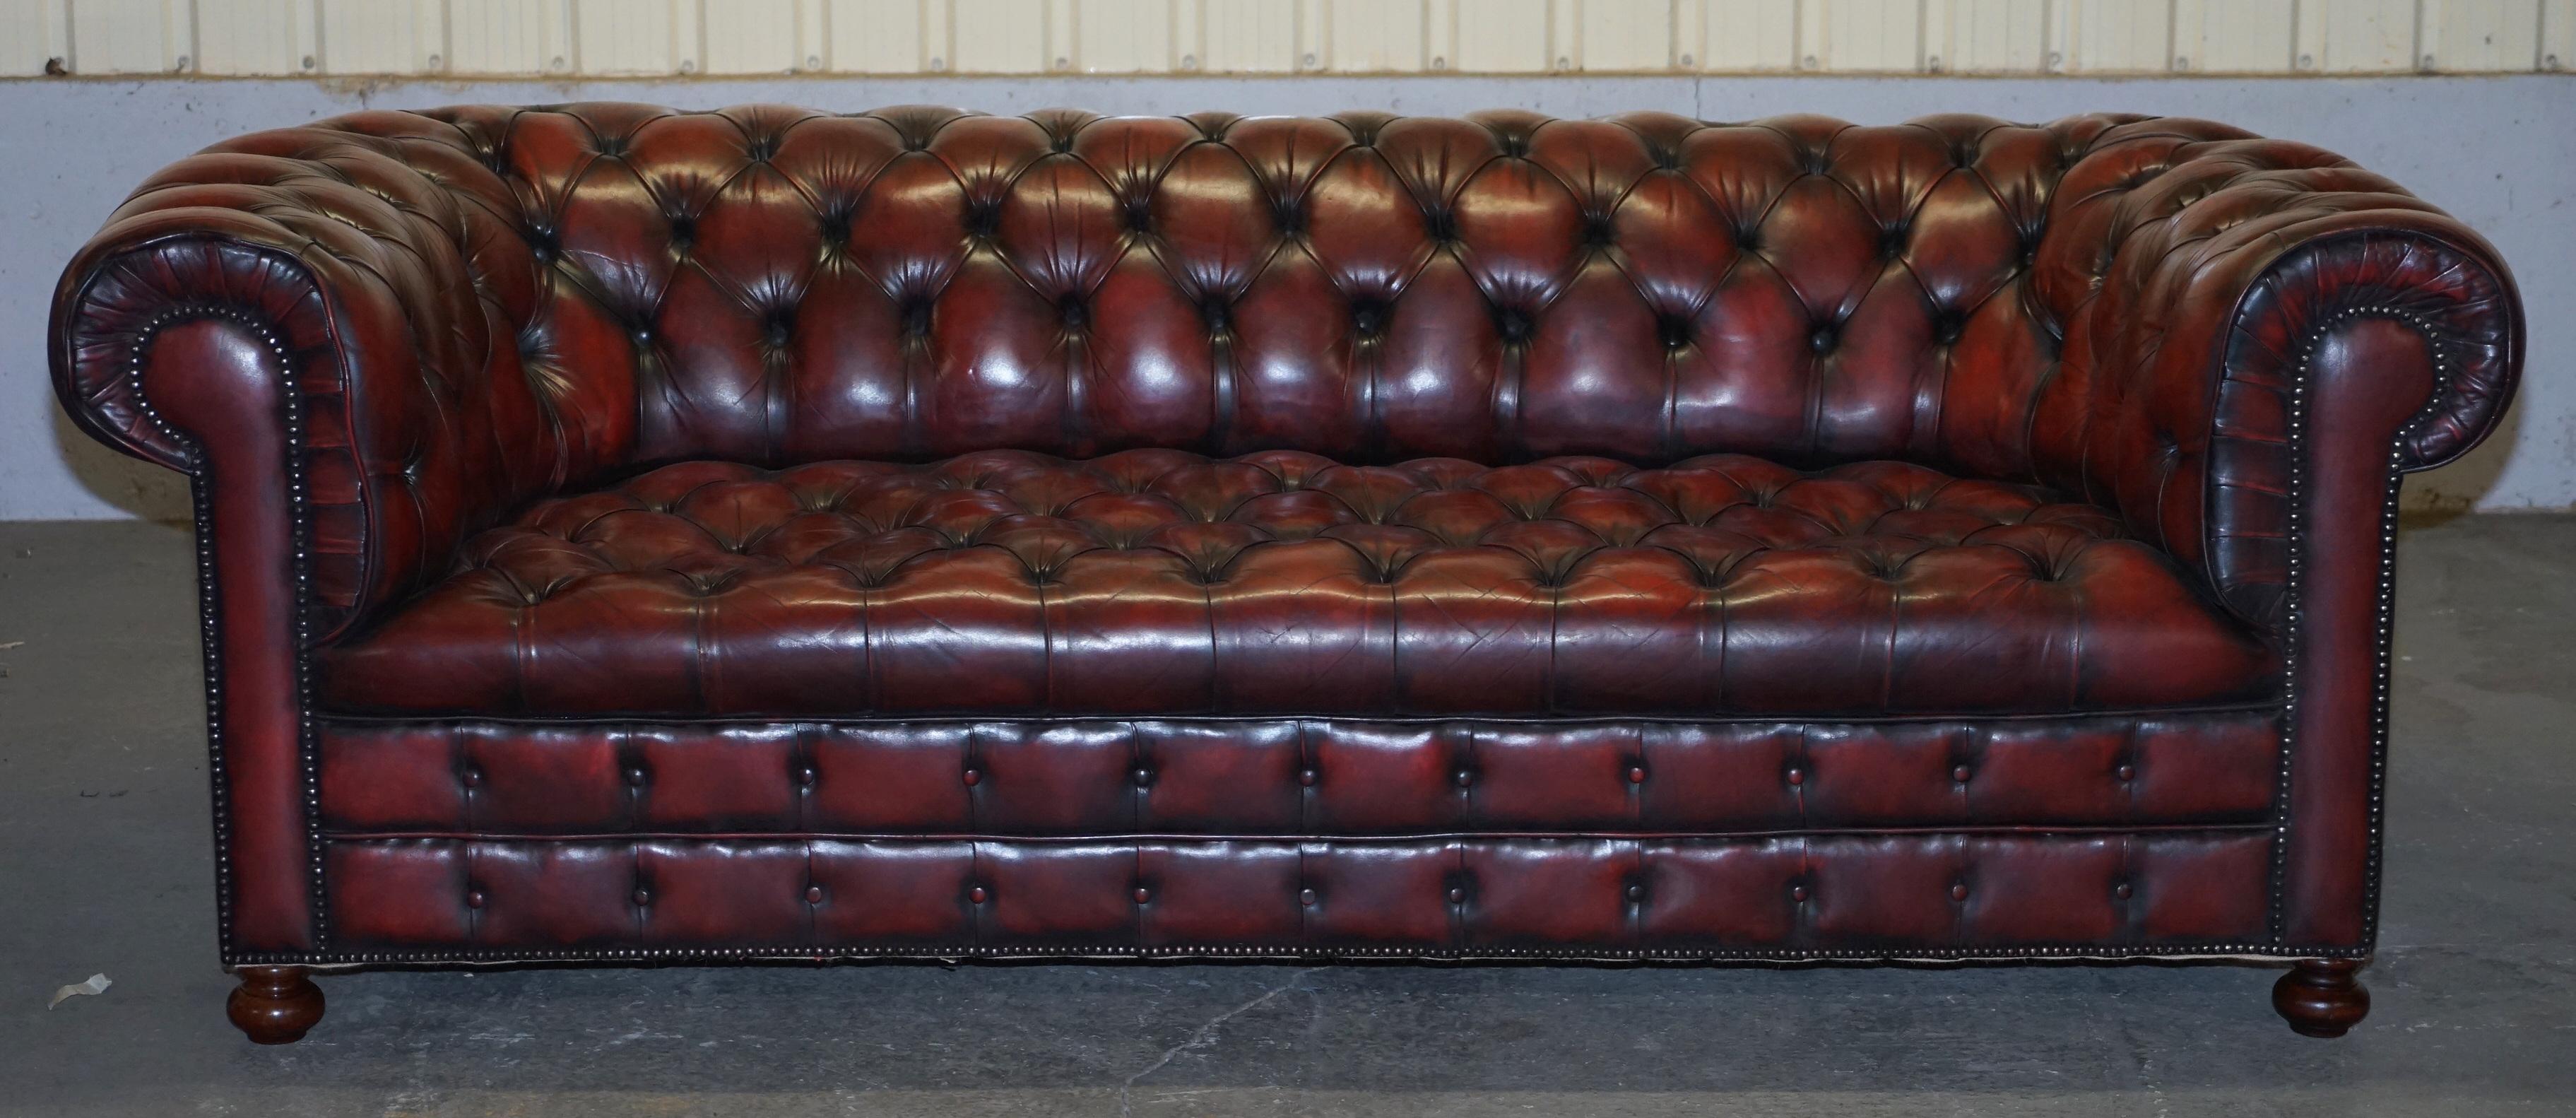 We are delighted to offer for sale this very rare large grand original circa 1880-1900 oxblood leather Chesterfield club sofa in fully restored condition with tufted buttoned base



This is a very good find, you almost never come across late